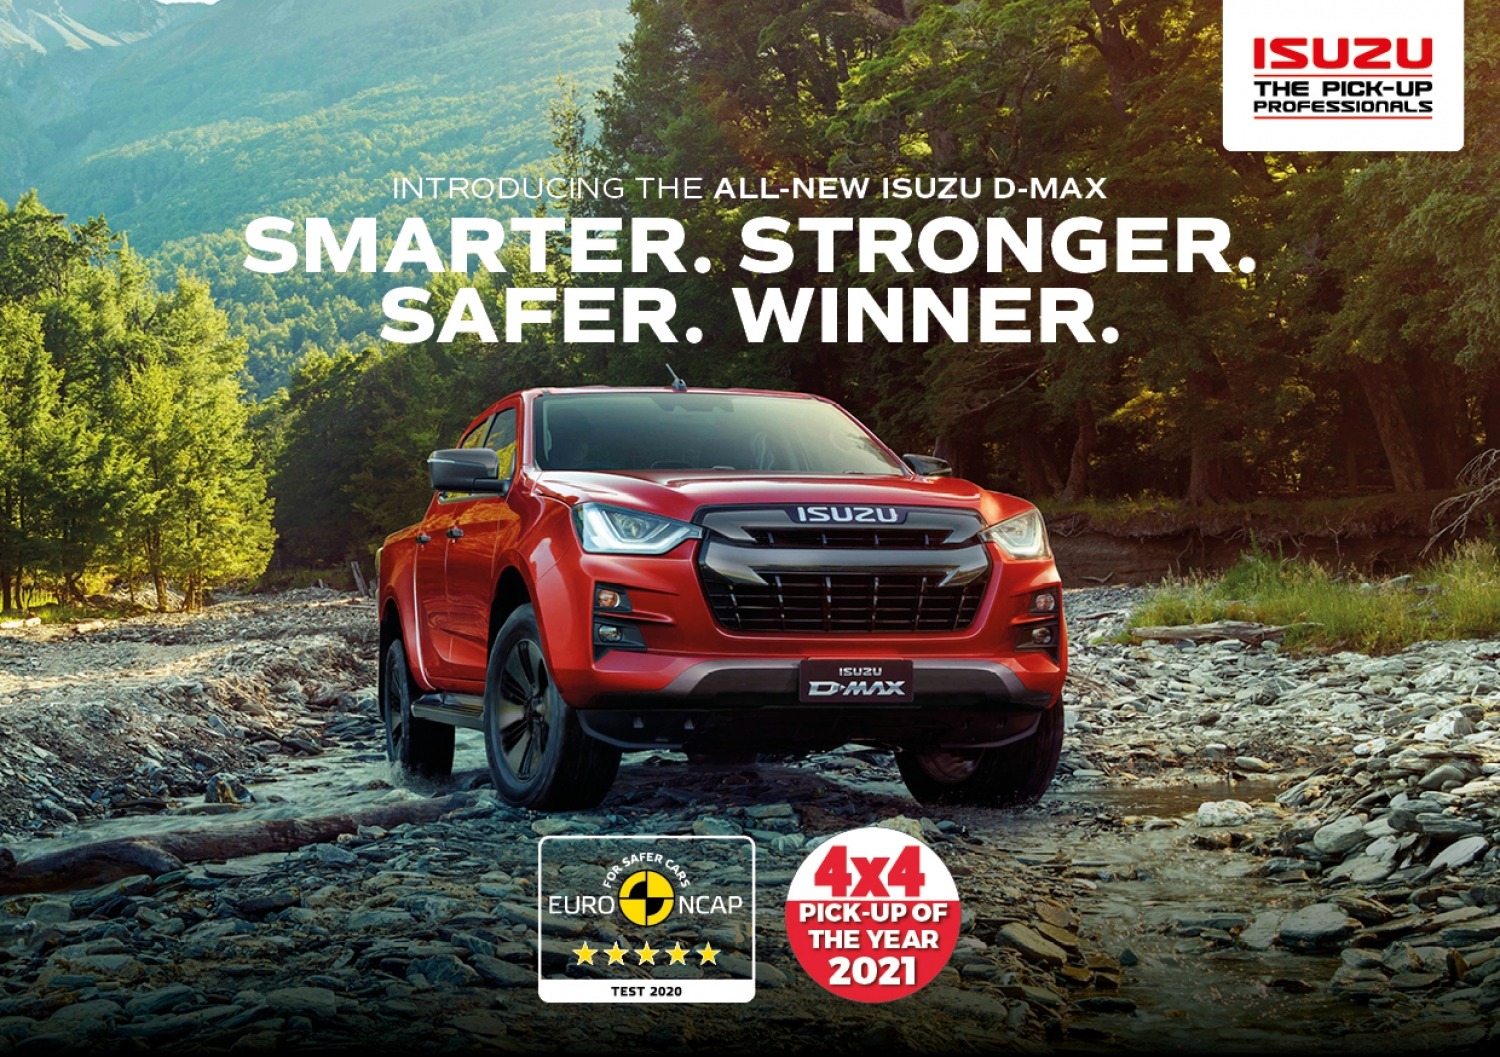 ALL-NEW ISUZU D-MAX CROWNED 2021 PICK-UP OF THE YEAR BY 4X4 MAGAZINE